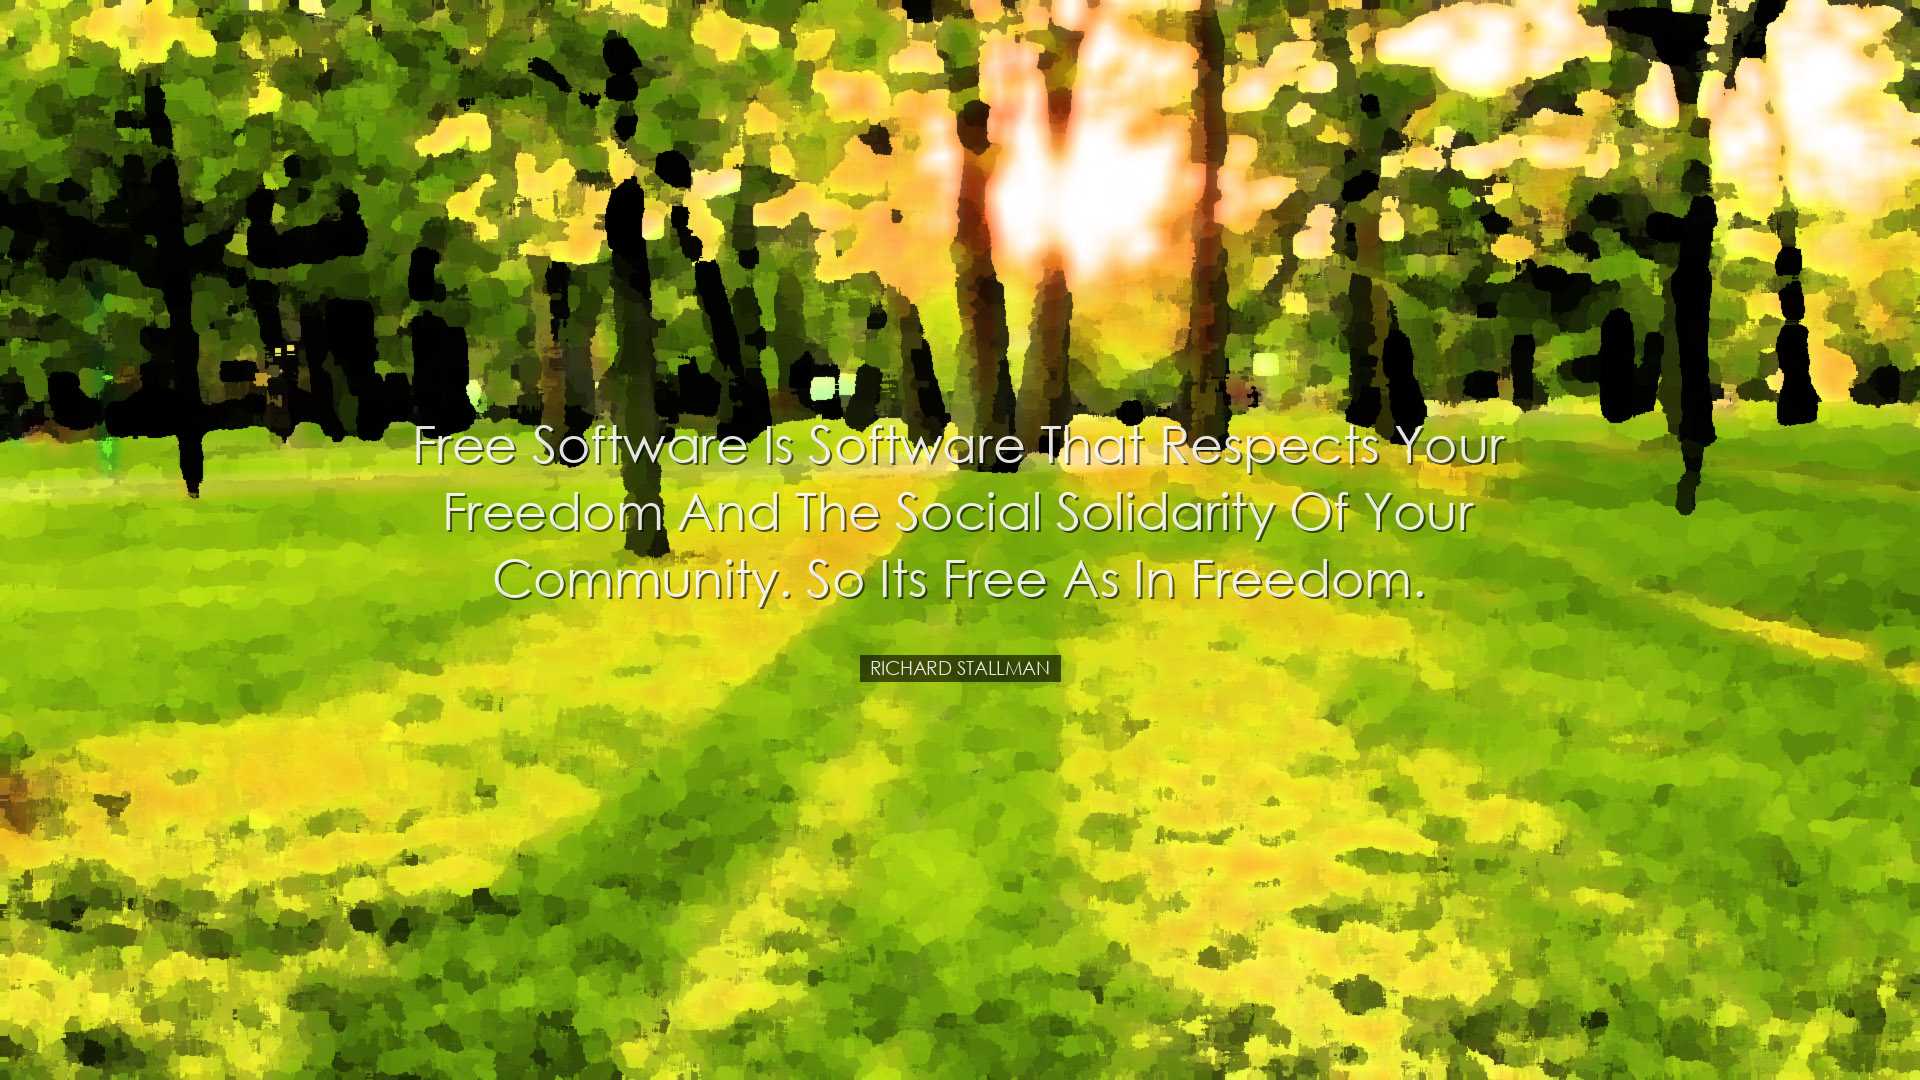 Free software is software that respects your freedom and the socia